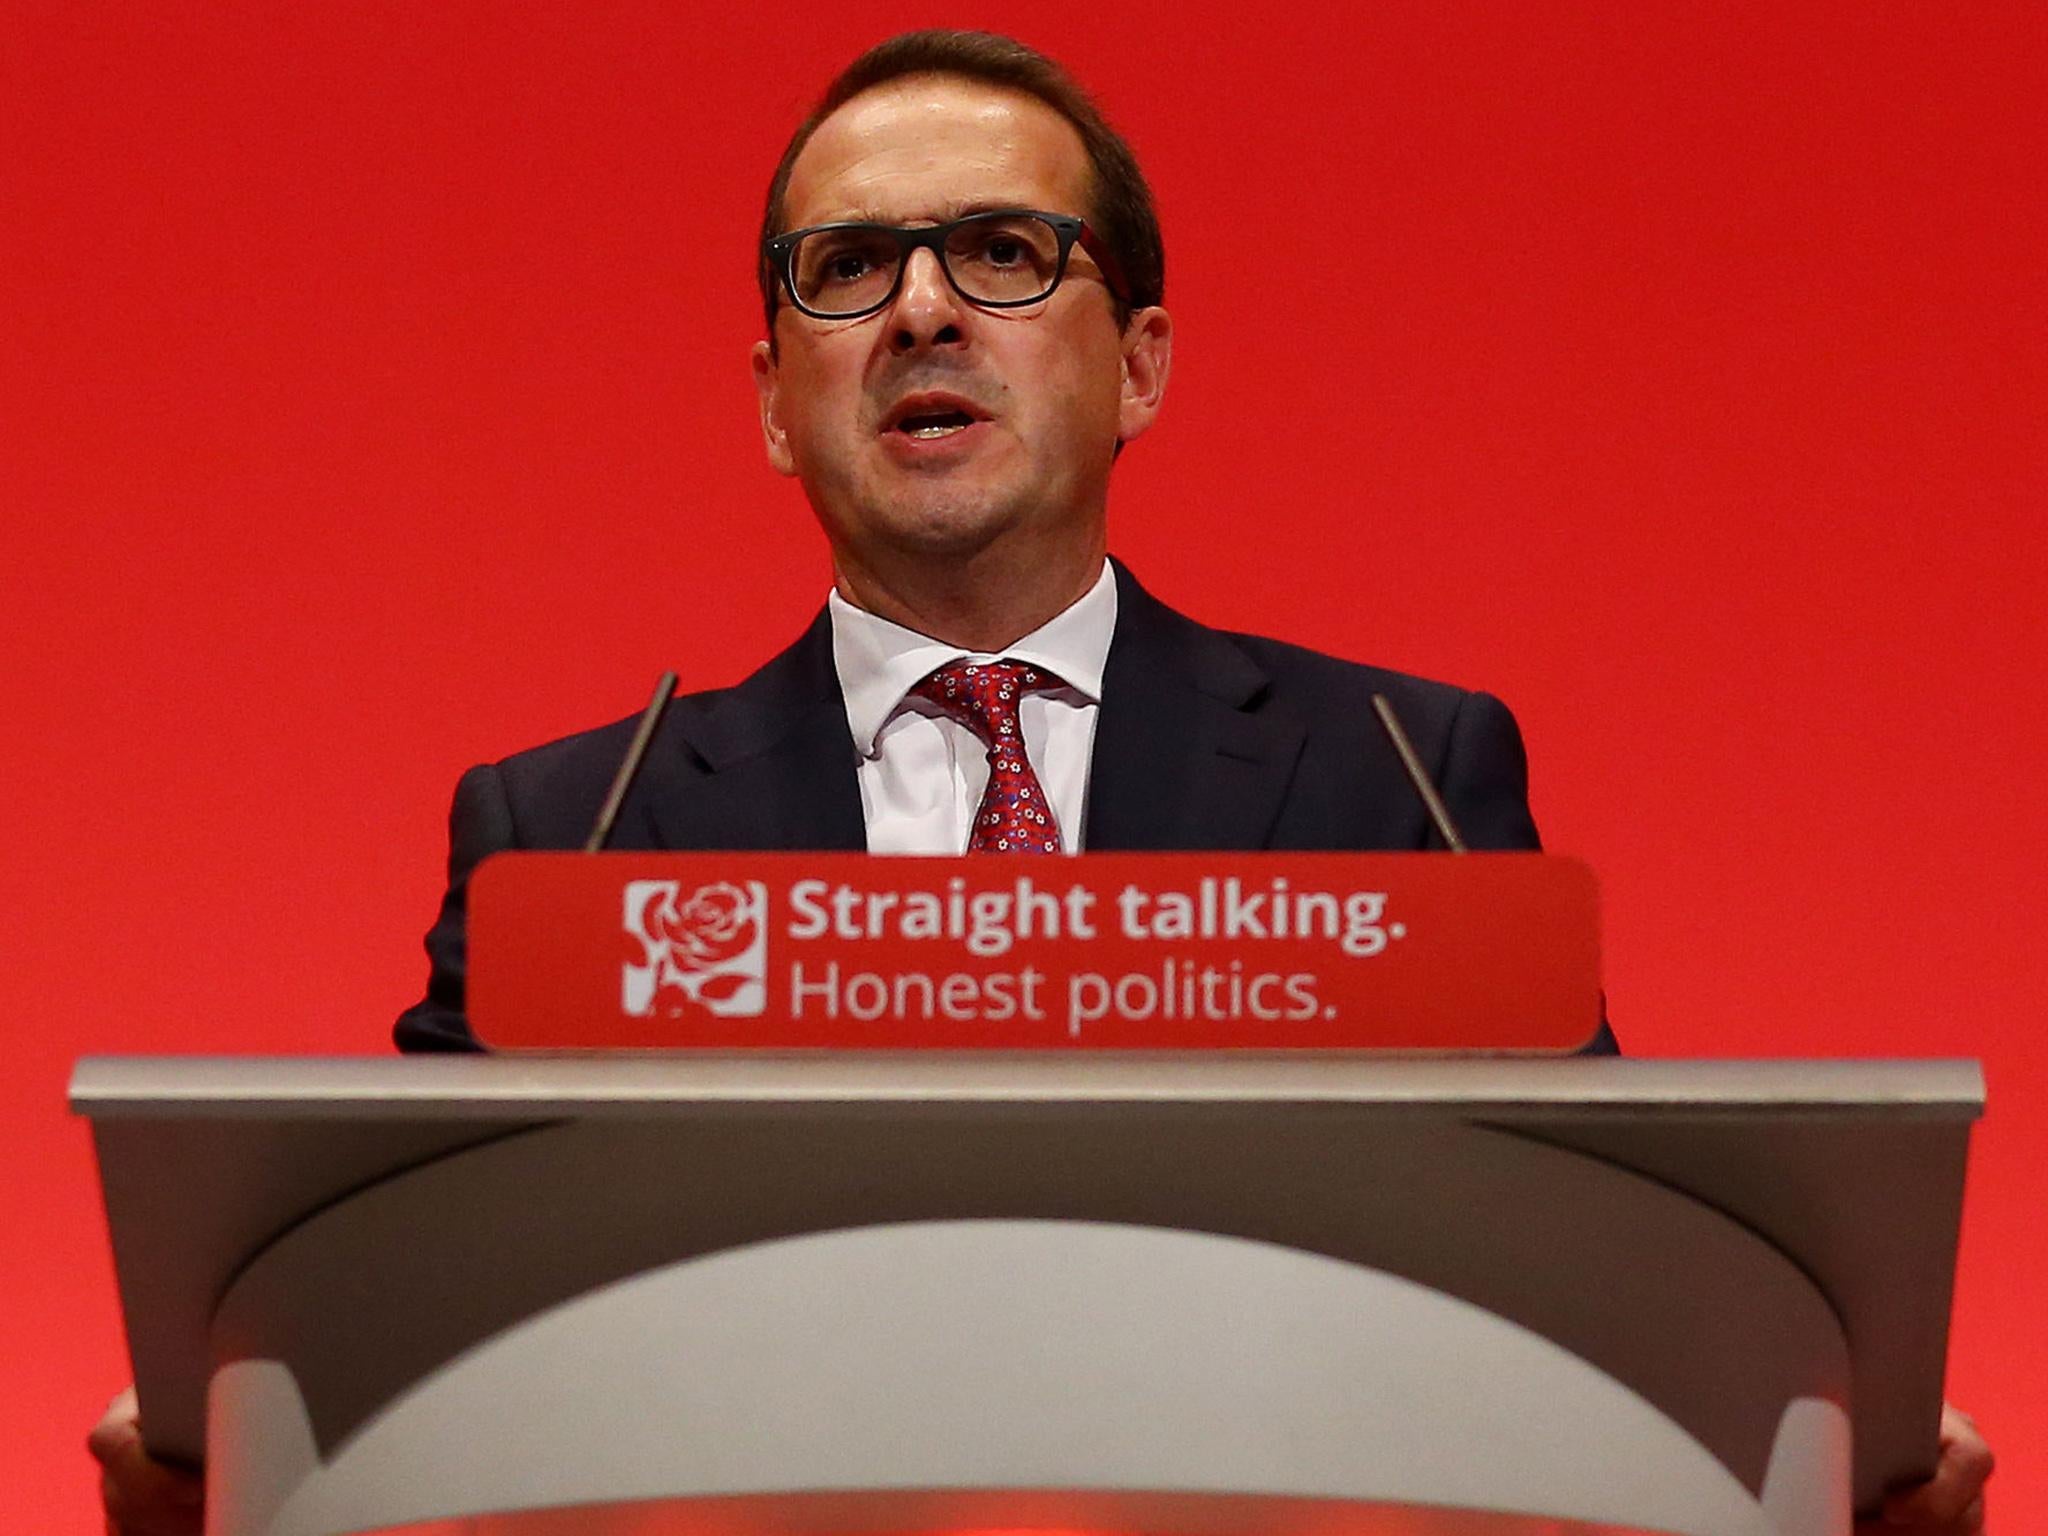 Owen Smith, who has cancelled the planned launch of his Labour leadership campaign in the wake of the latest terror attack in France